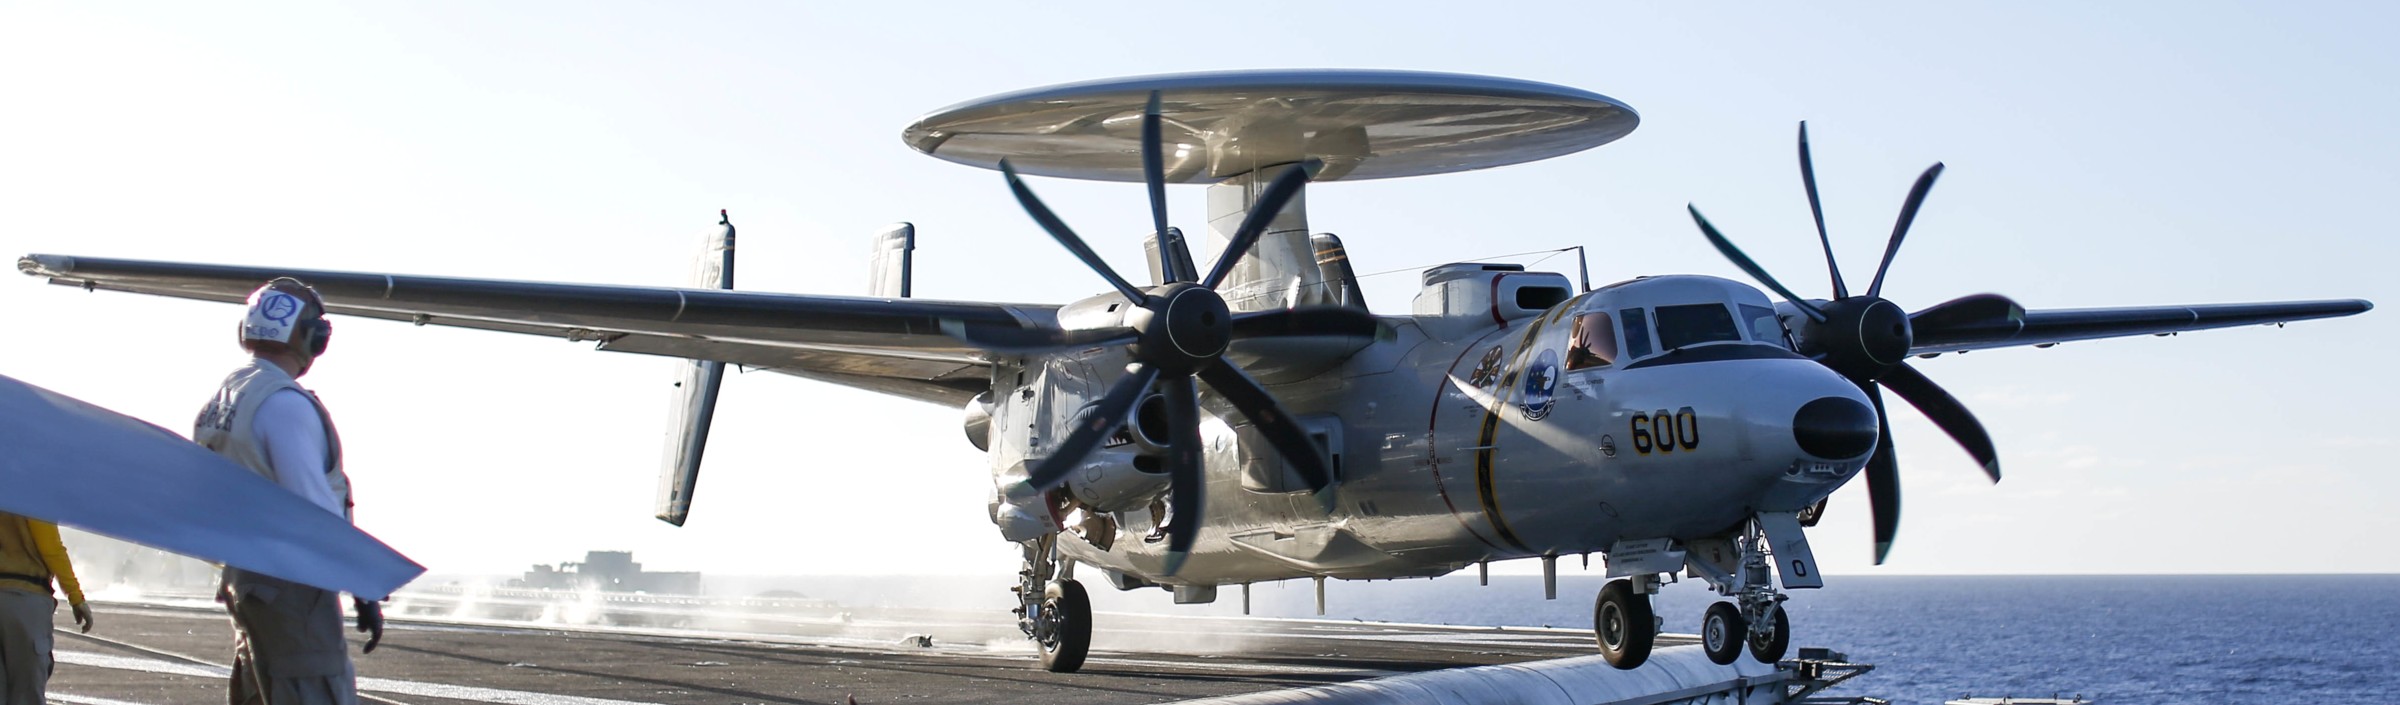 vaw-117 wallbangers airborne command and control squadron navy e-2d hawkeye cvw-9 uss abraham lincoln cvn-72 35